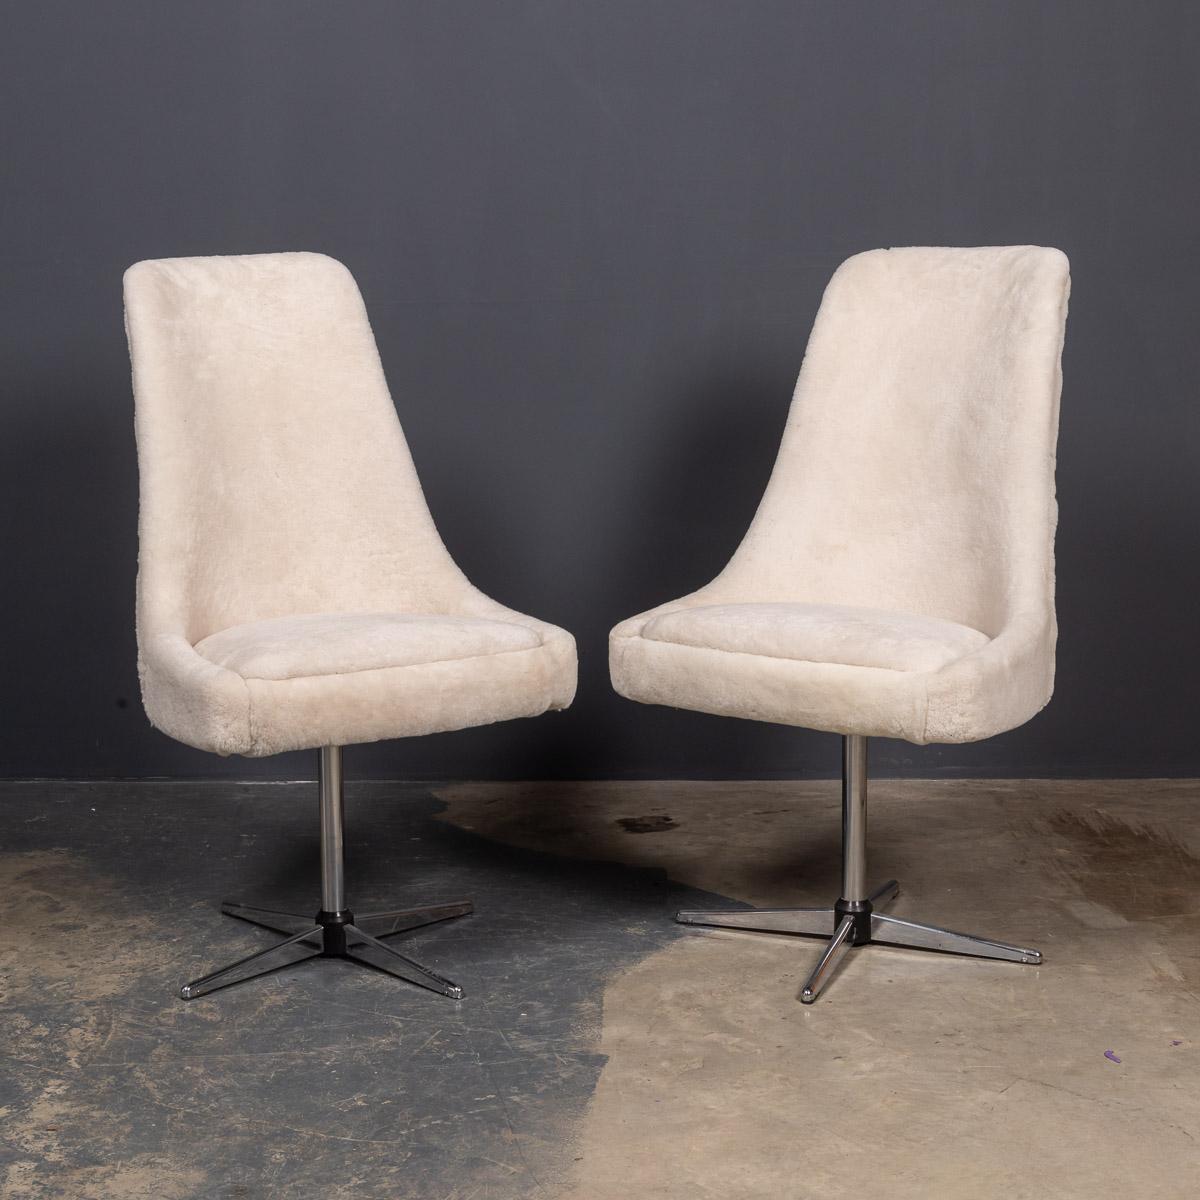 Elegant mid-20th century pair of swivel occasional chairs with polished tulip bases and recently upholstered in natural shearling.

Measures: Height: 97cm
Depth: 50cm
Width: 56m.